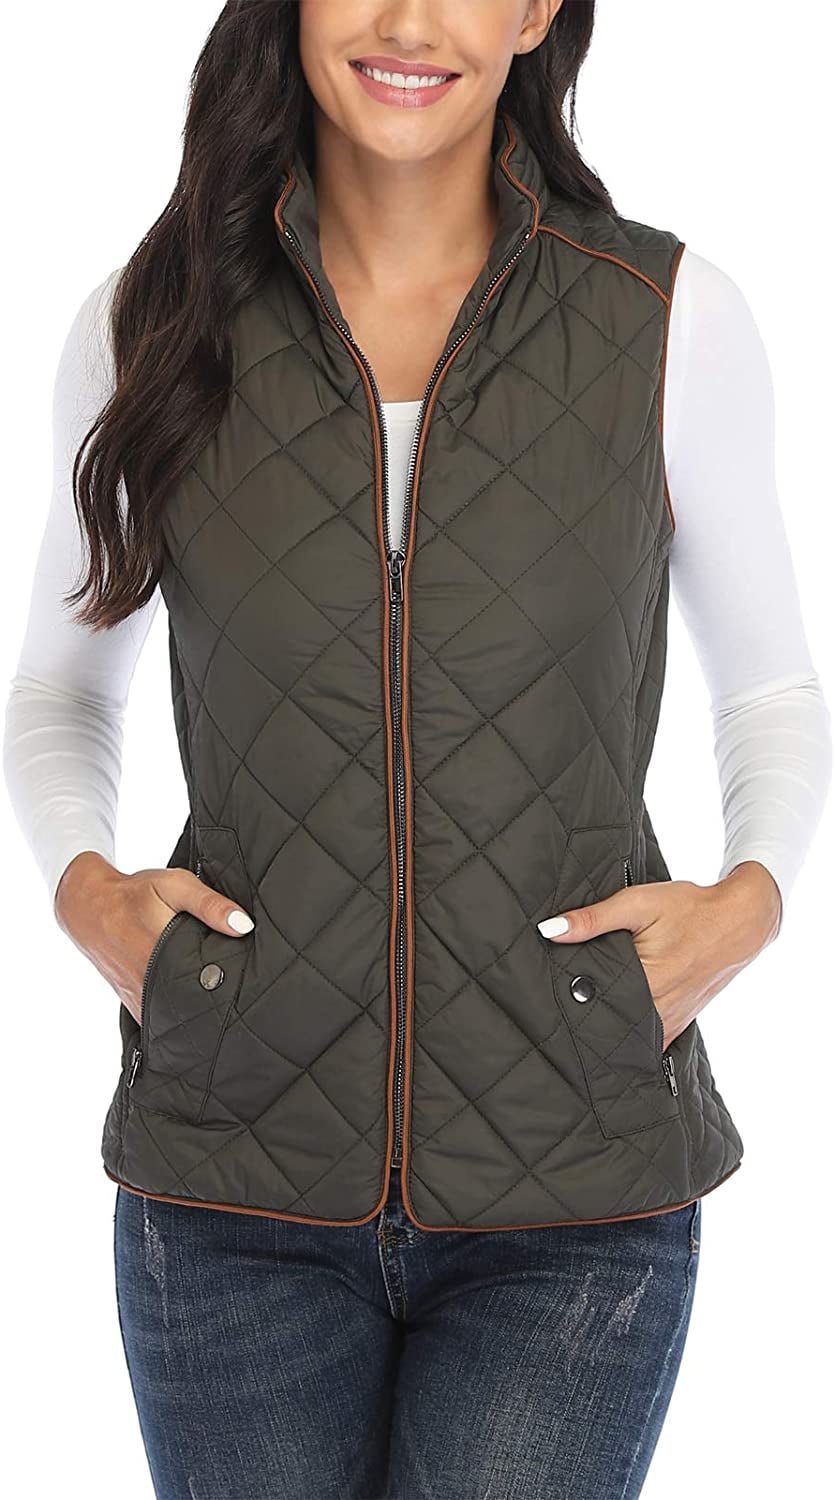 MISS MOLY Women Quilted Vest Zip Up Stand Collar Lightweight Padded Vest Jacket Winter Outwear 